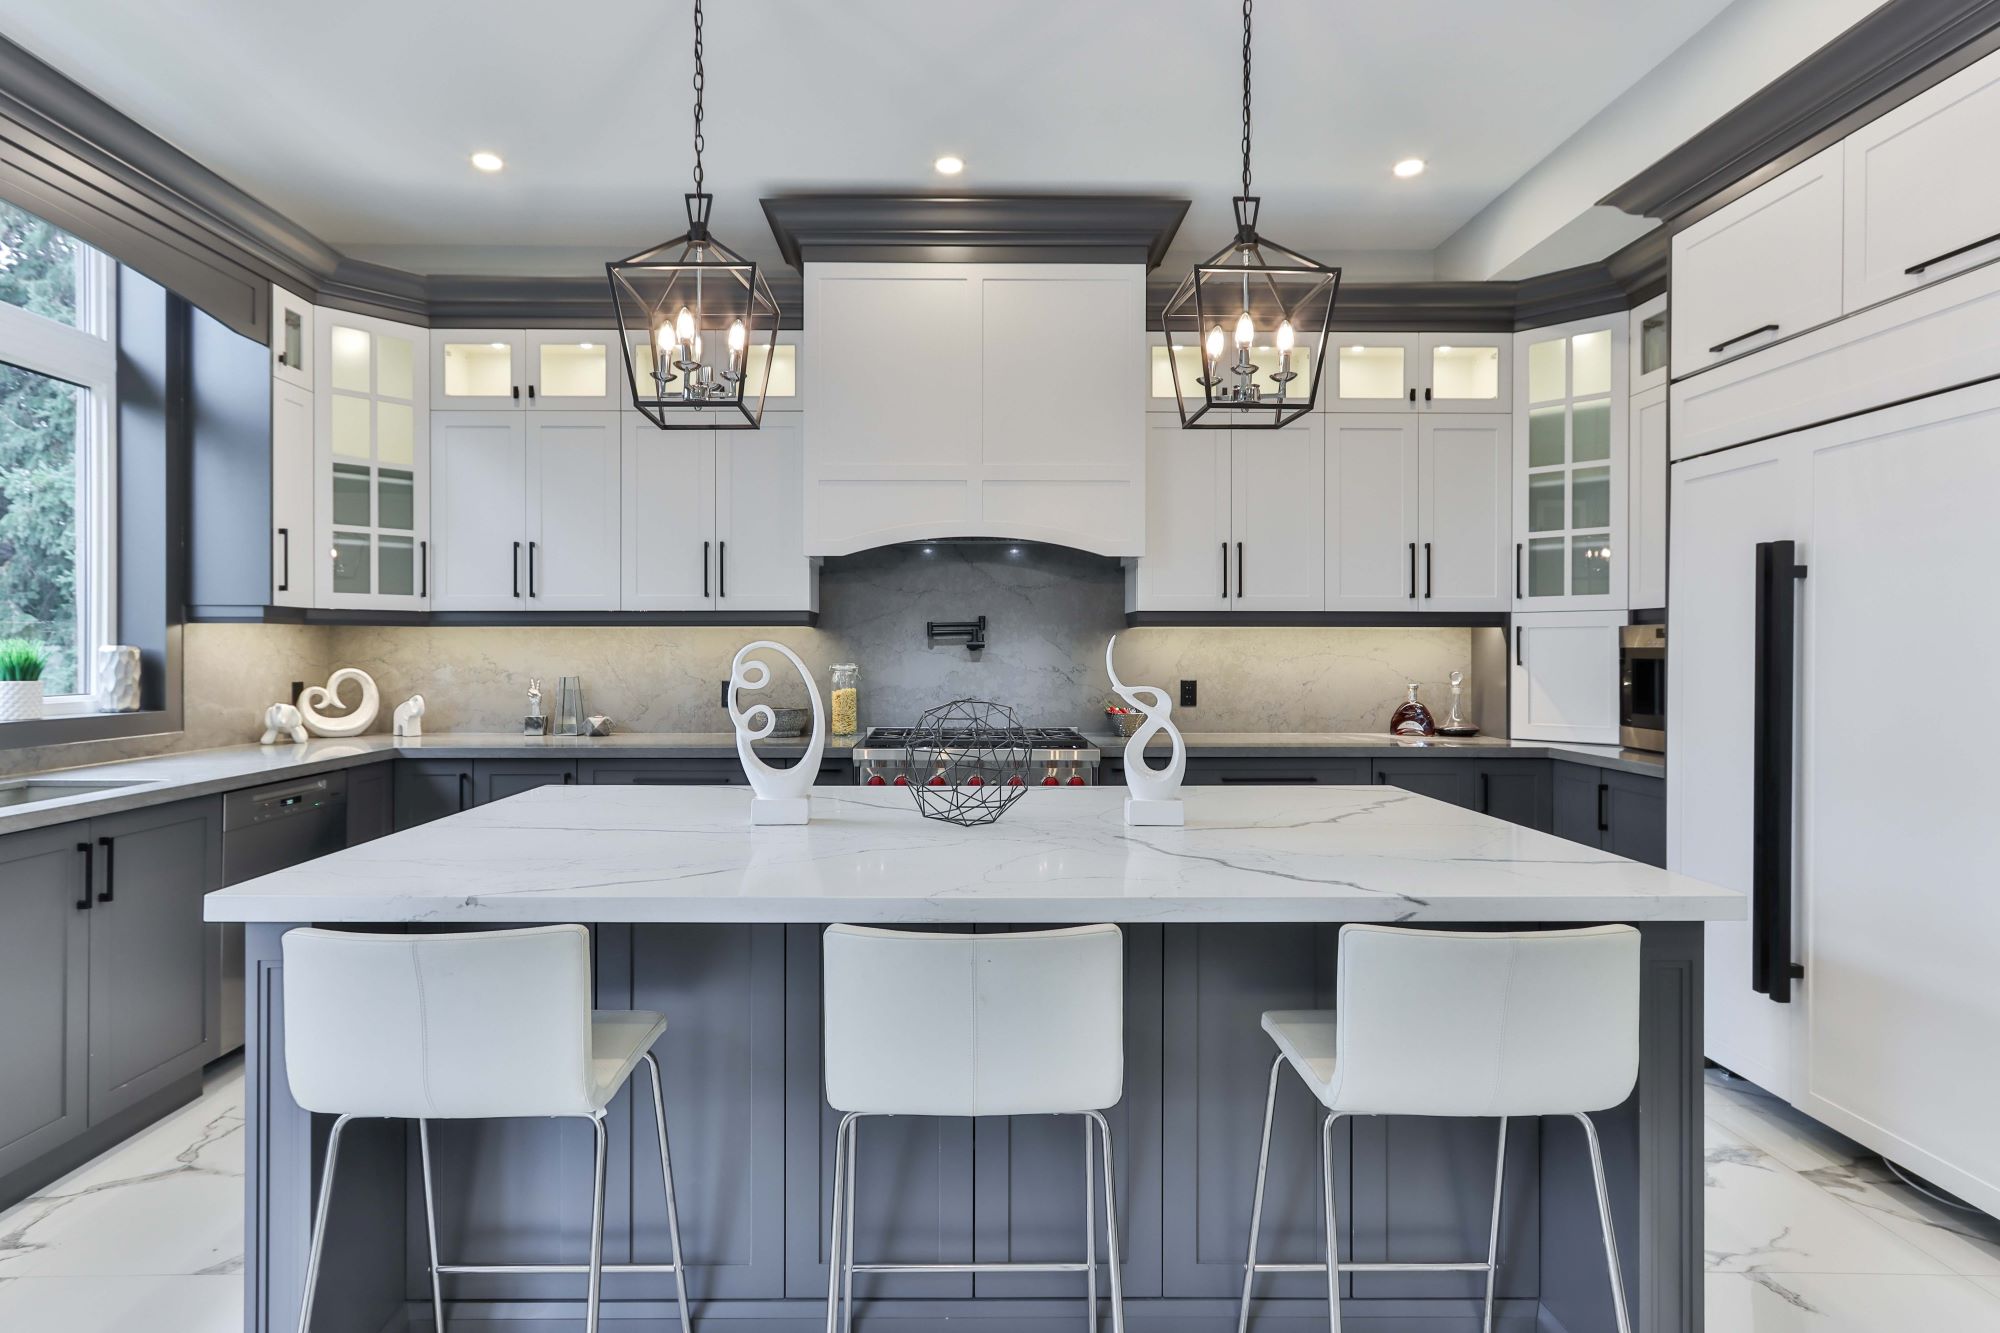 Tips on Lighting Your Kitchen